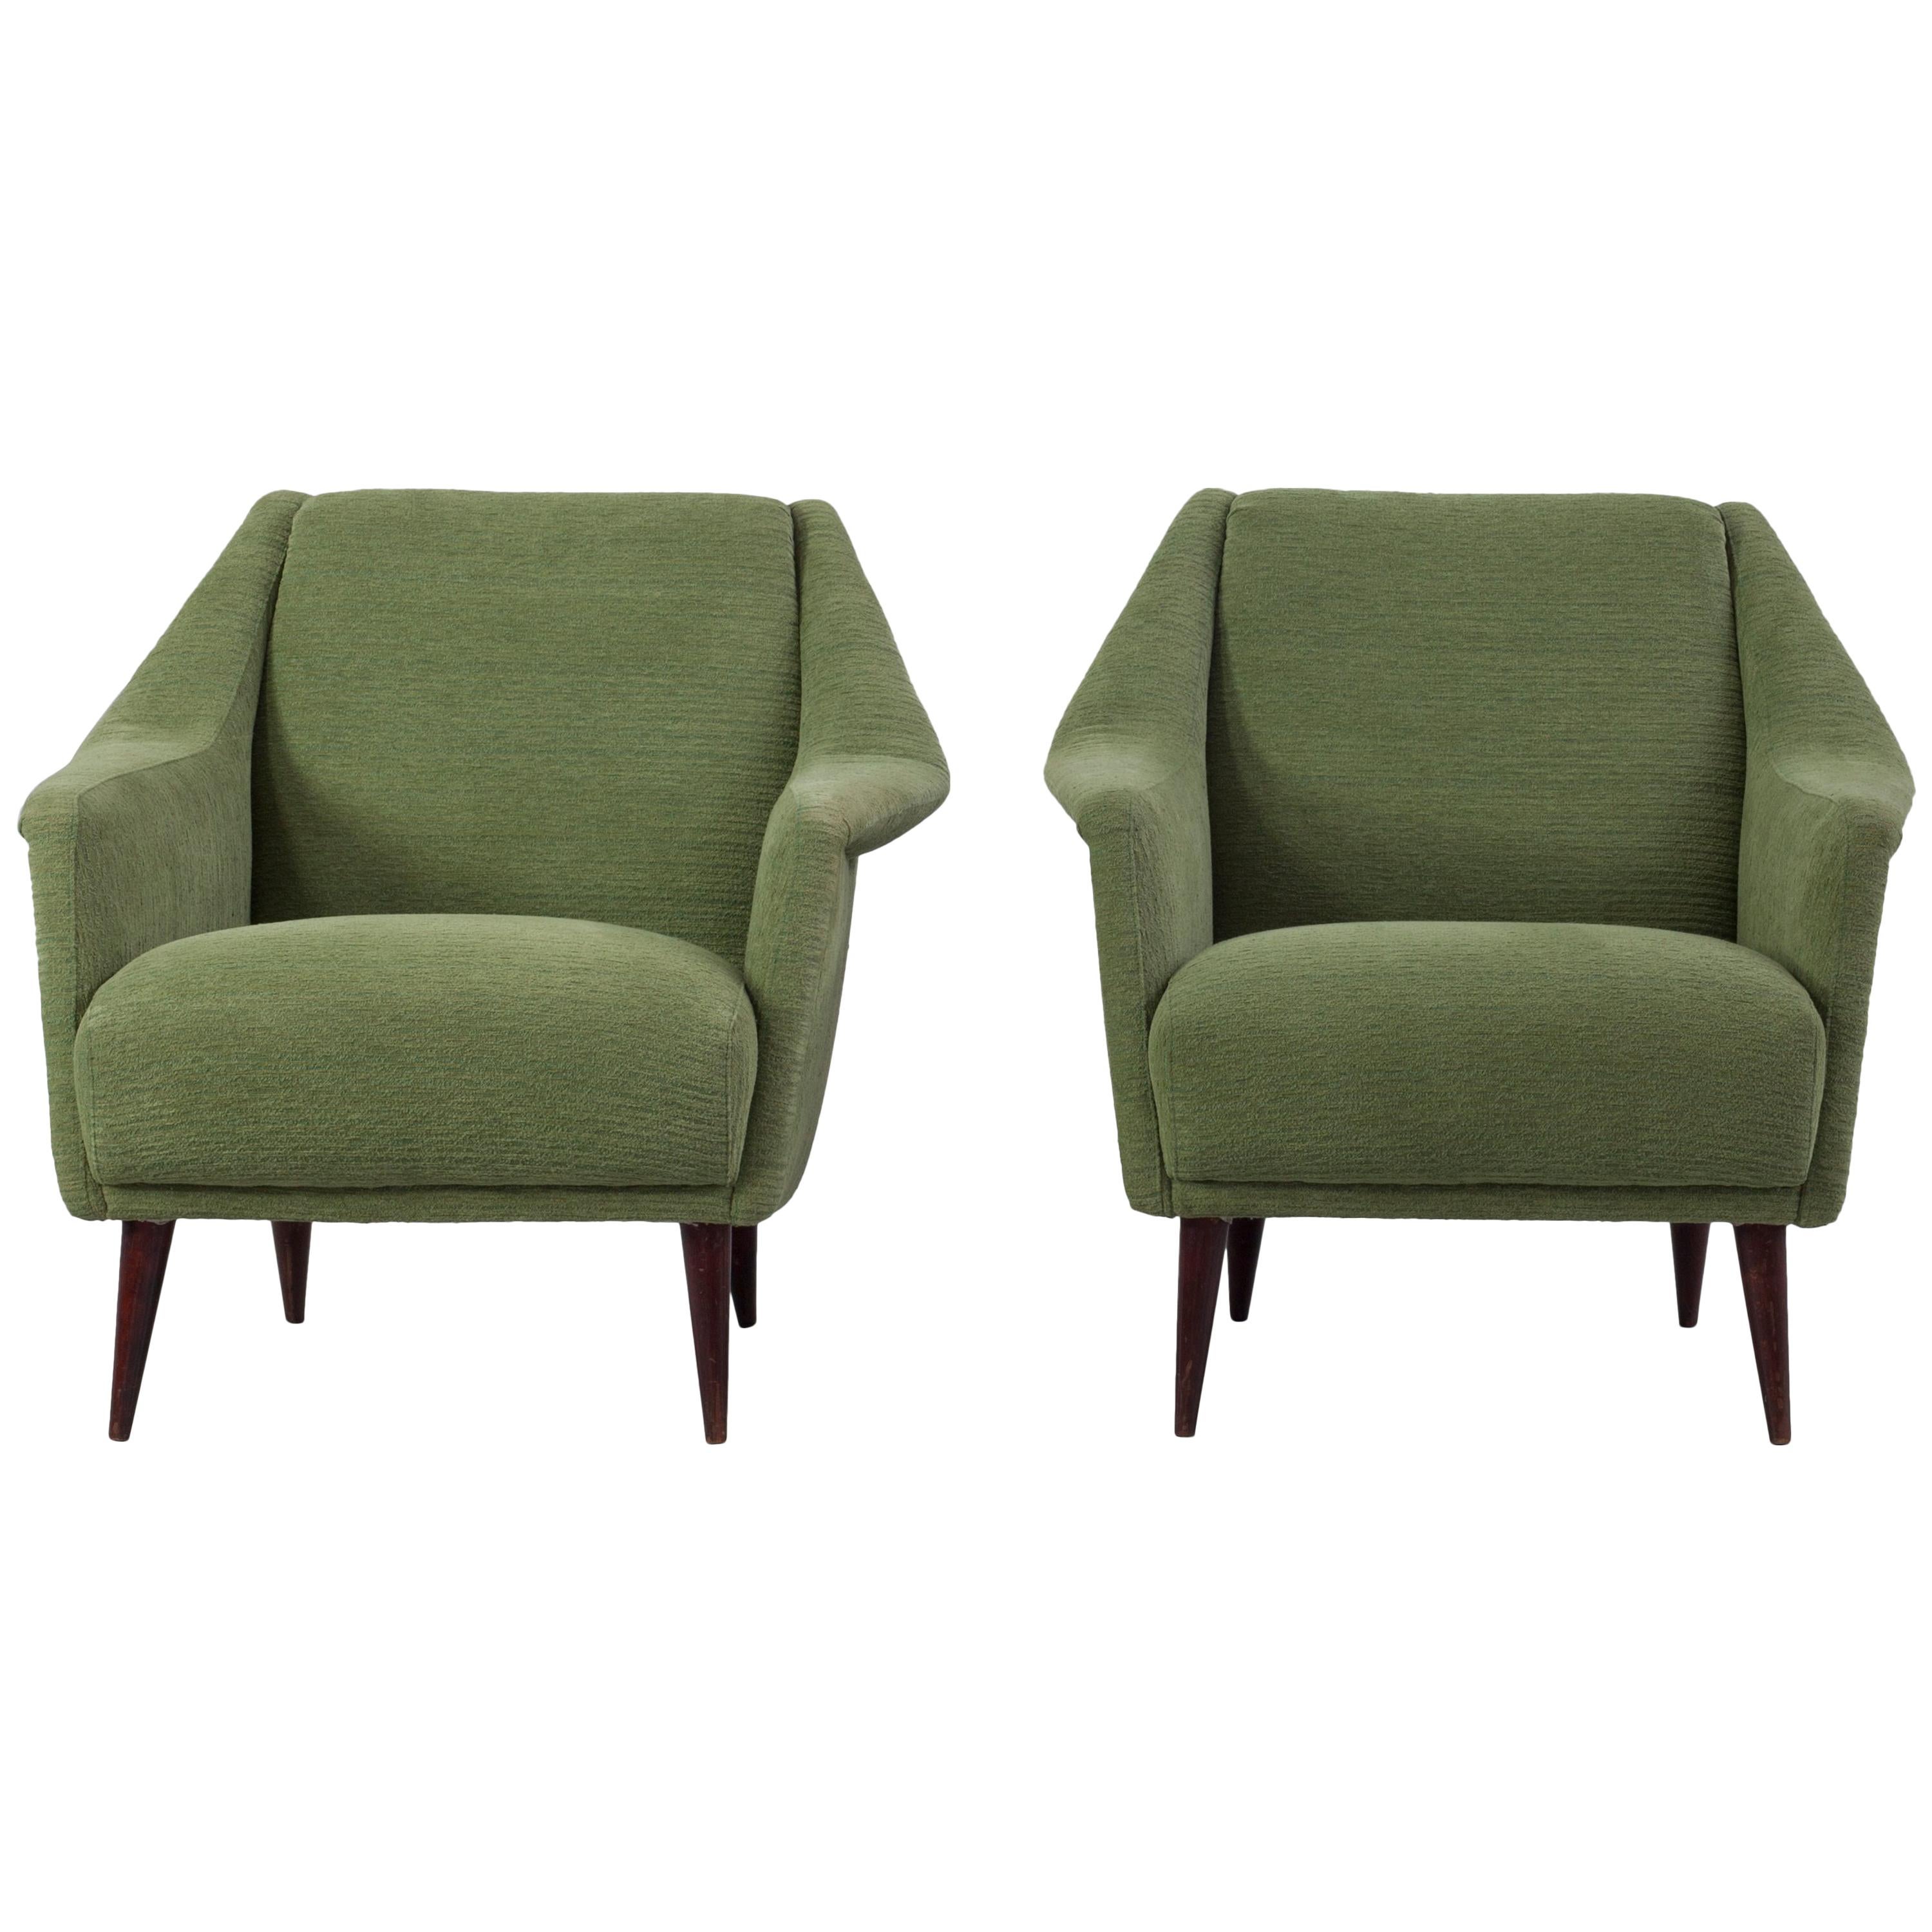 Set of Two Midcentury Green Model 802 Armchairs by Carlo de Carli for Cassina